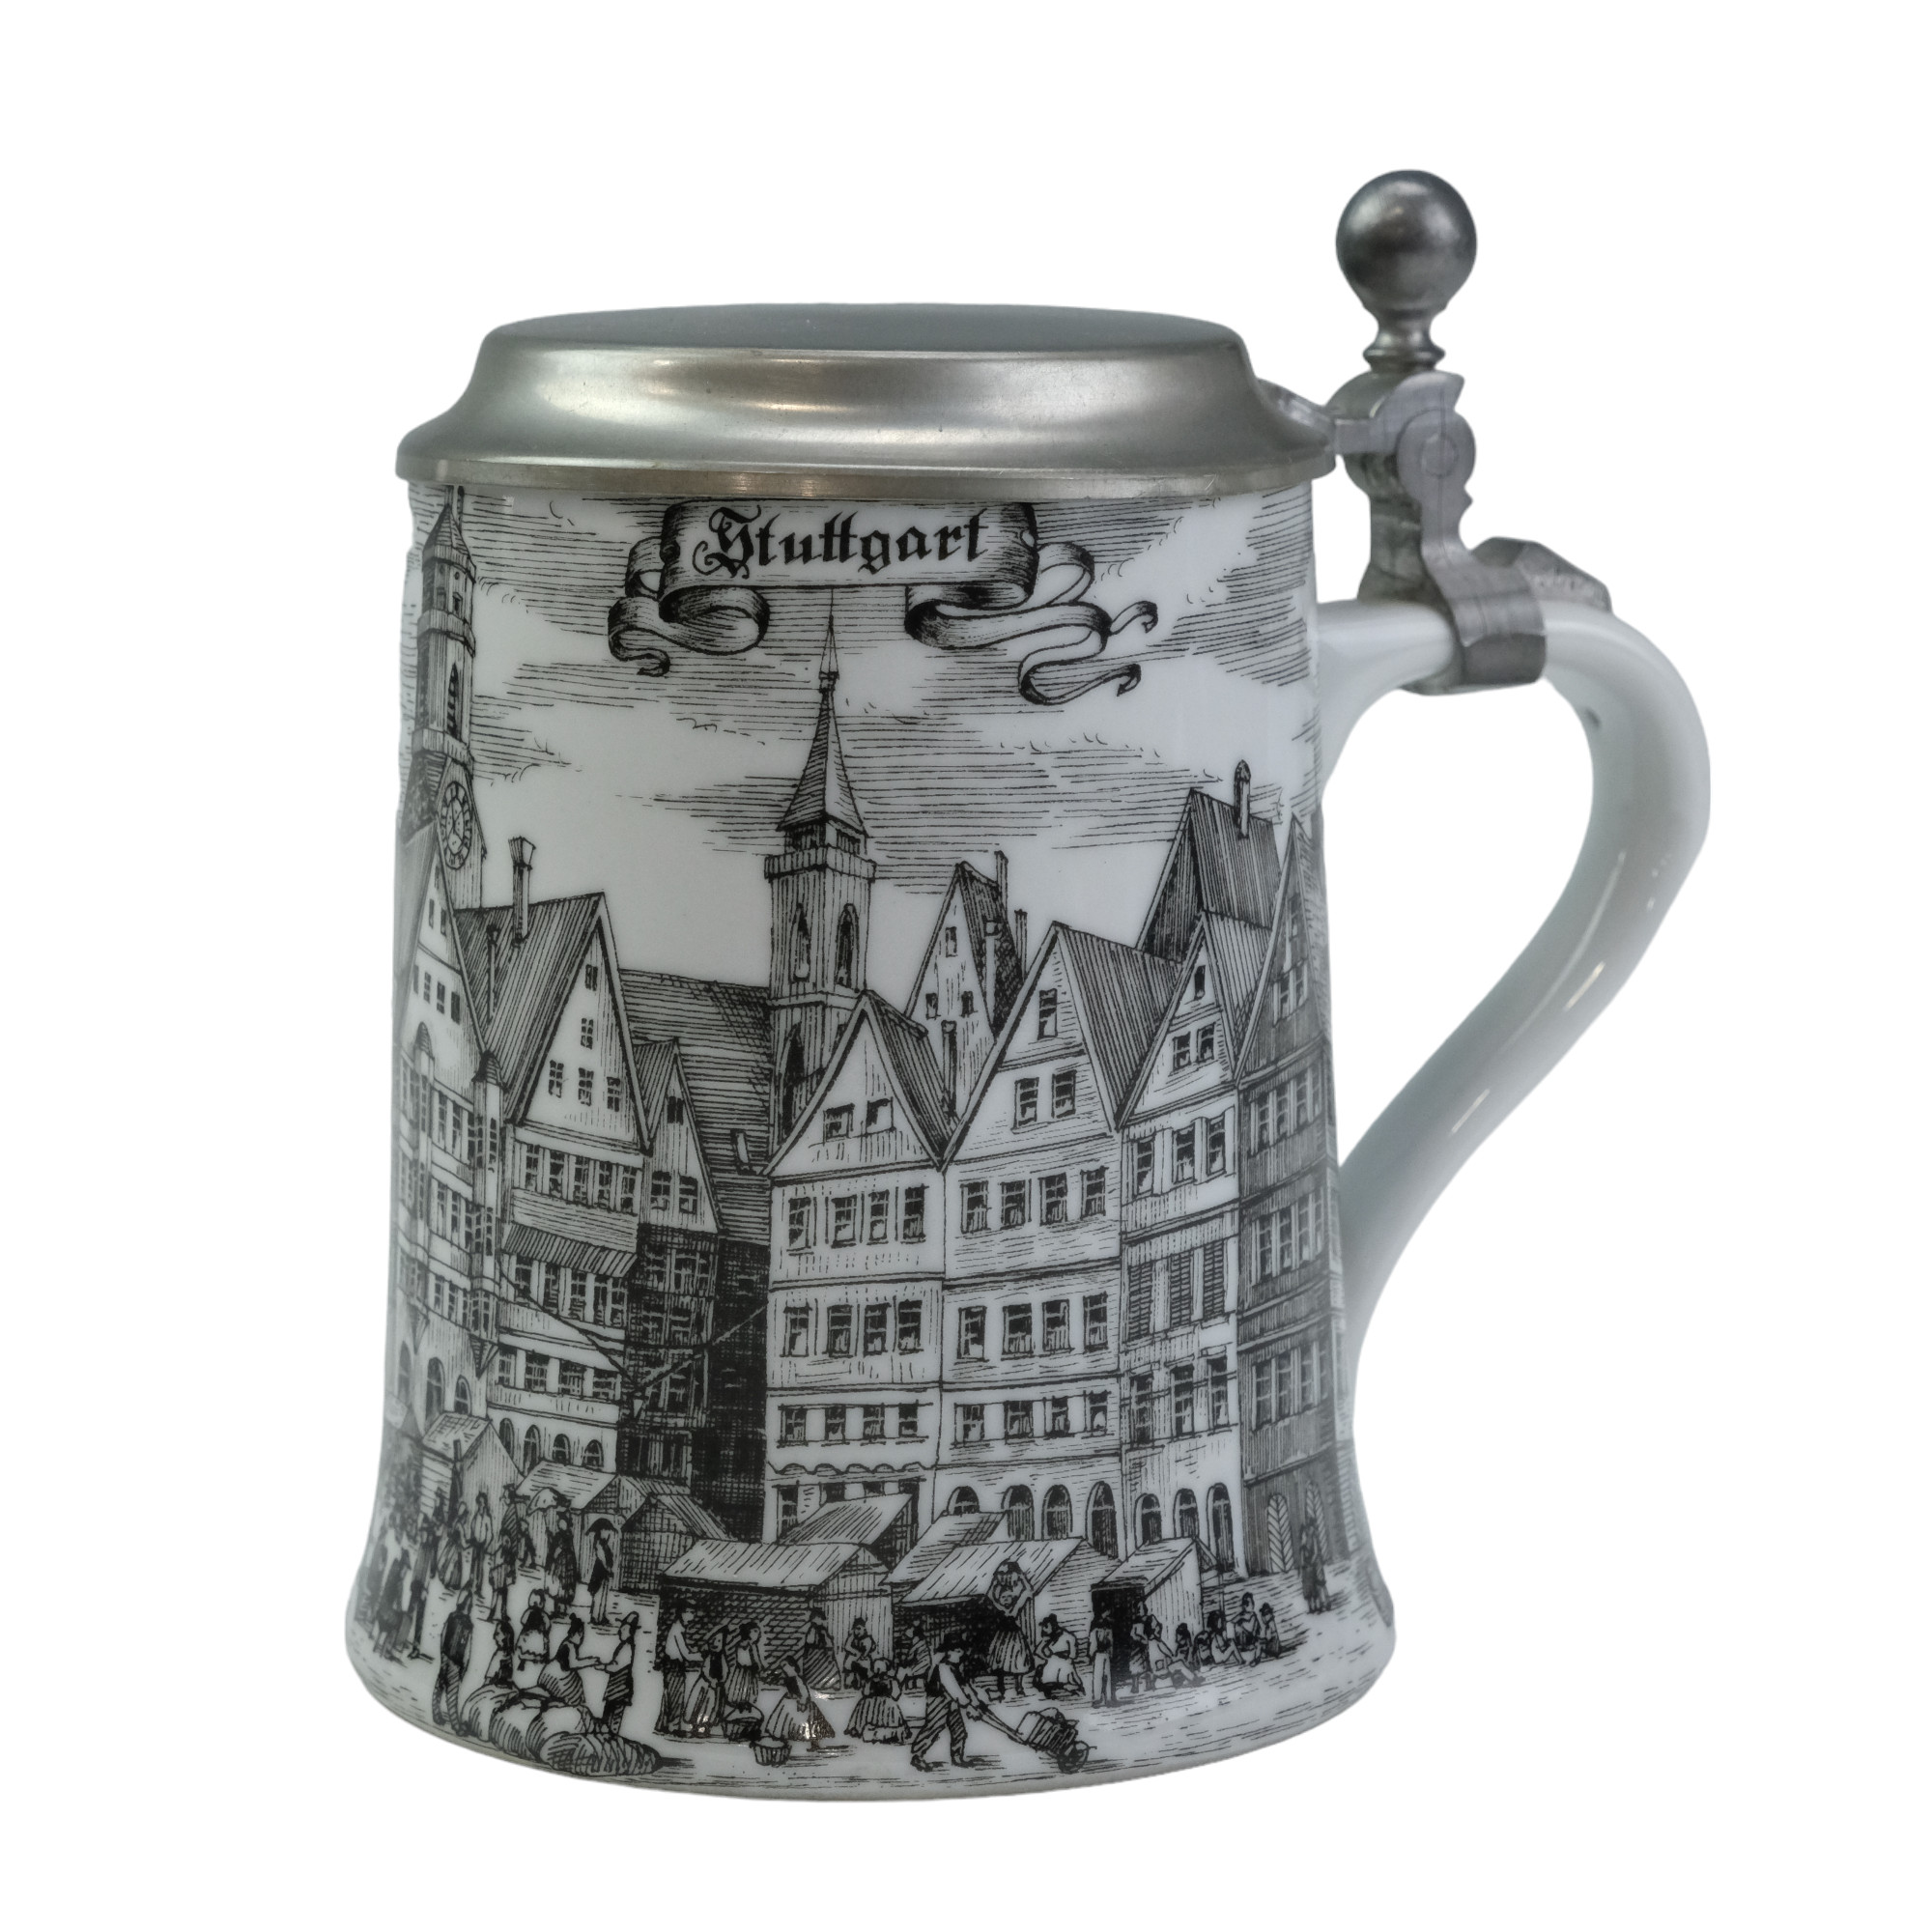 An official Mercedes-Benz traditional German pewter-mounted porcelain beer stein, circa 1990, 15 cm